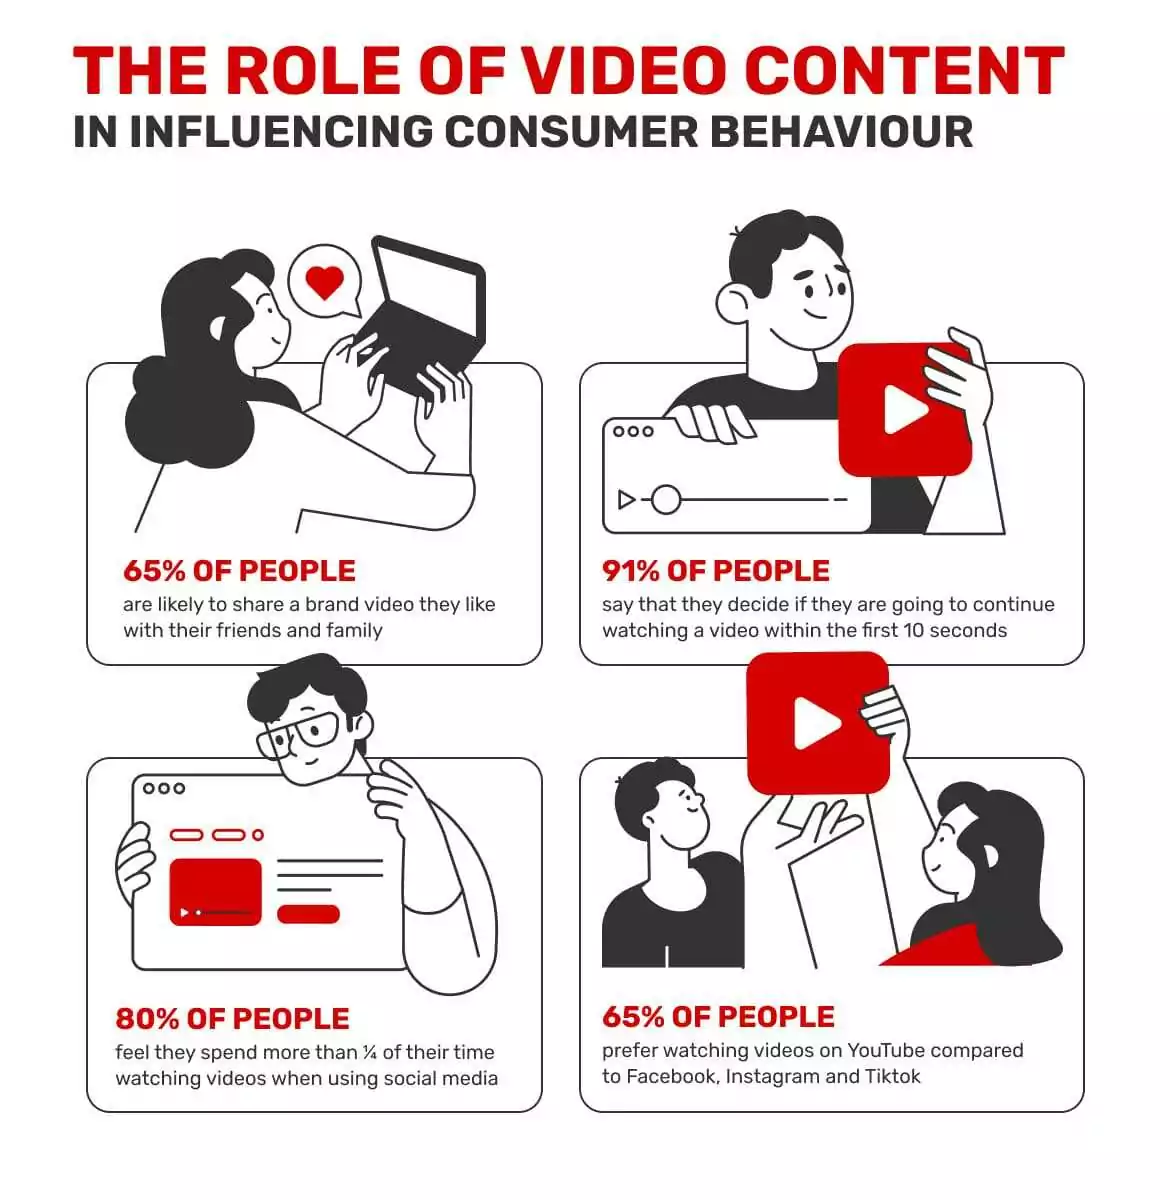 mobile-marketing-trends-the-role-of-video-content-in-influencing-consumer-behaviour